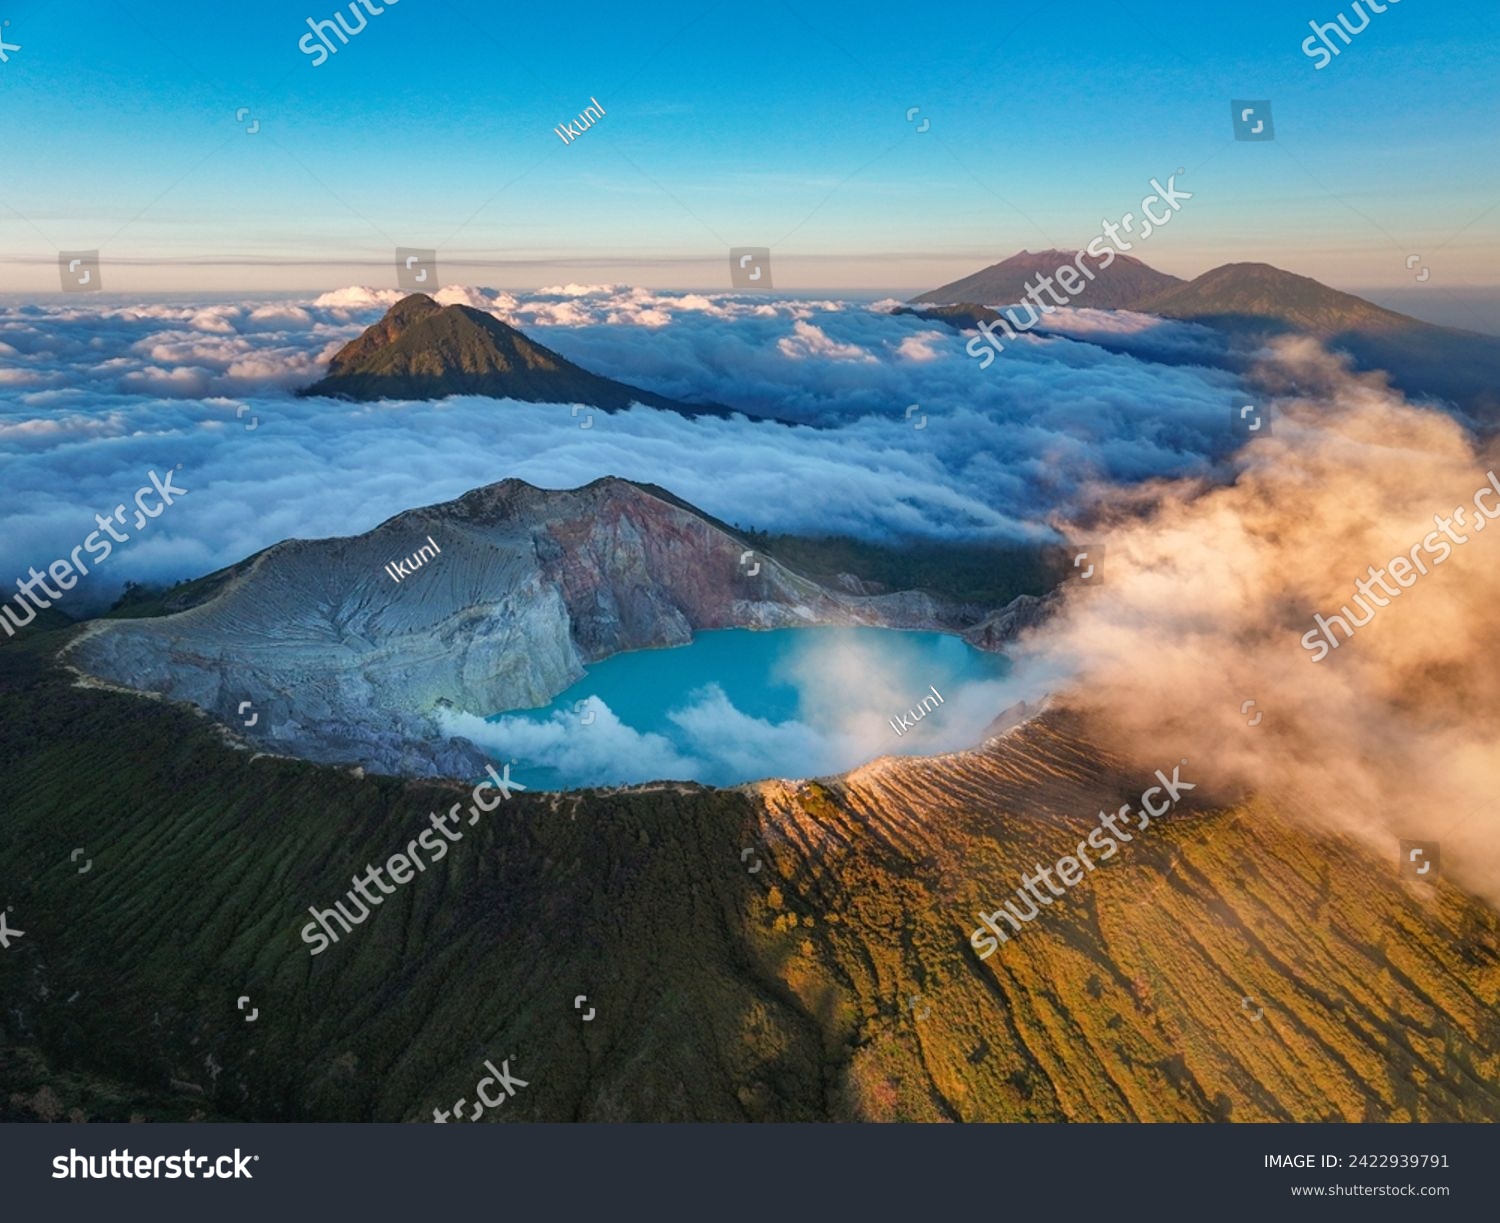 Aerial view of mount Kawah Ijen volcano crater at sunrise, East Java, Indonesia #2422939791